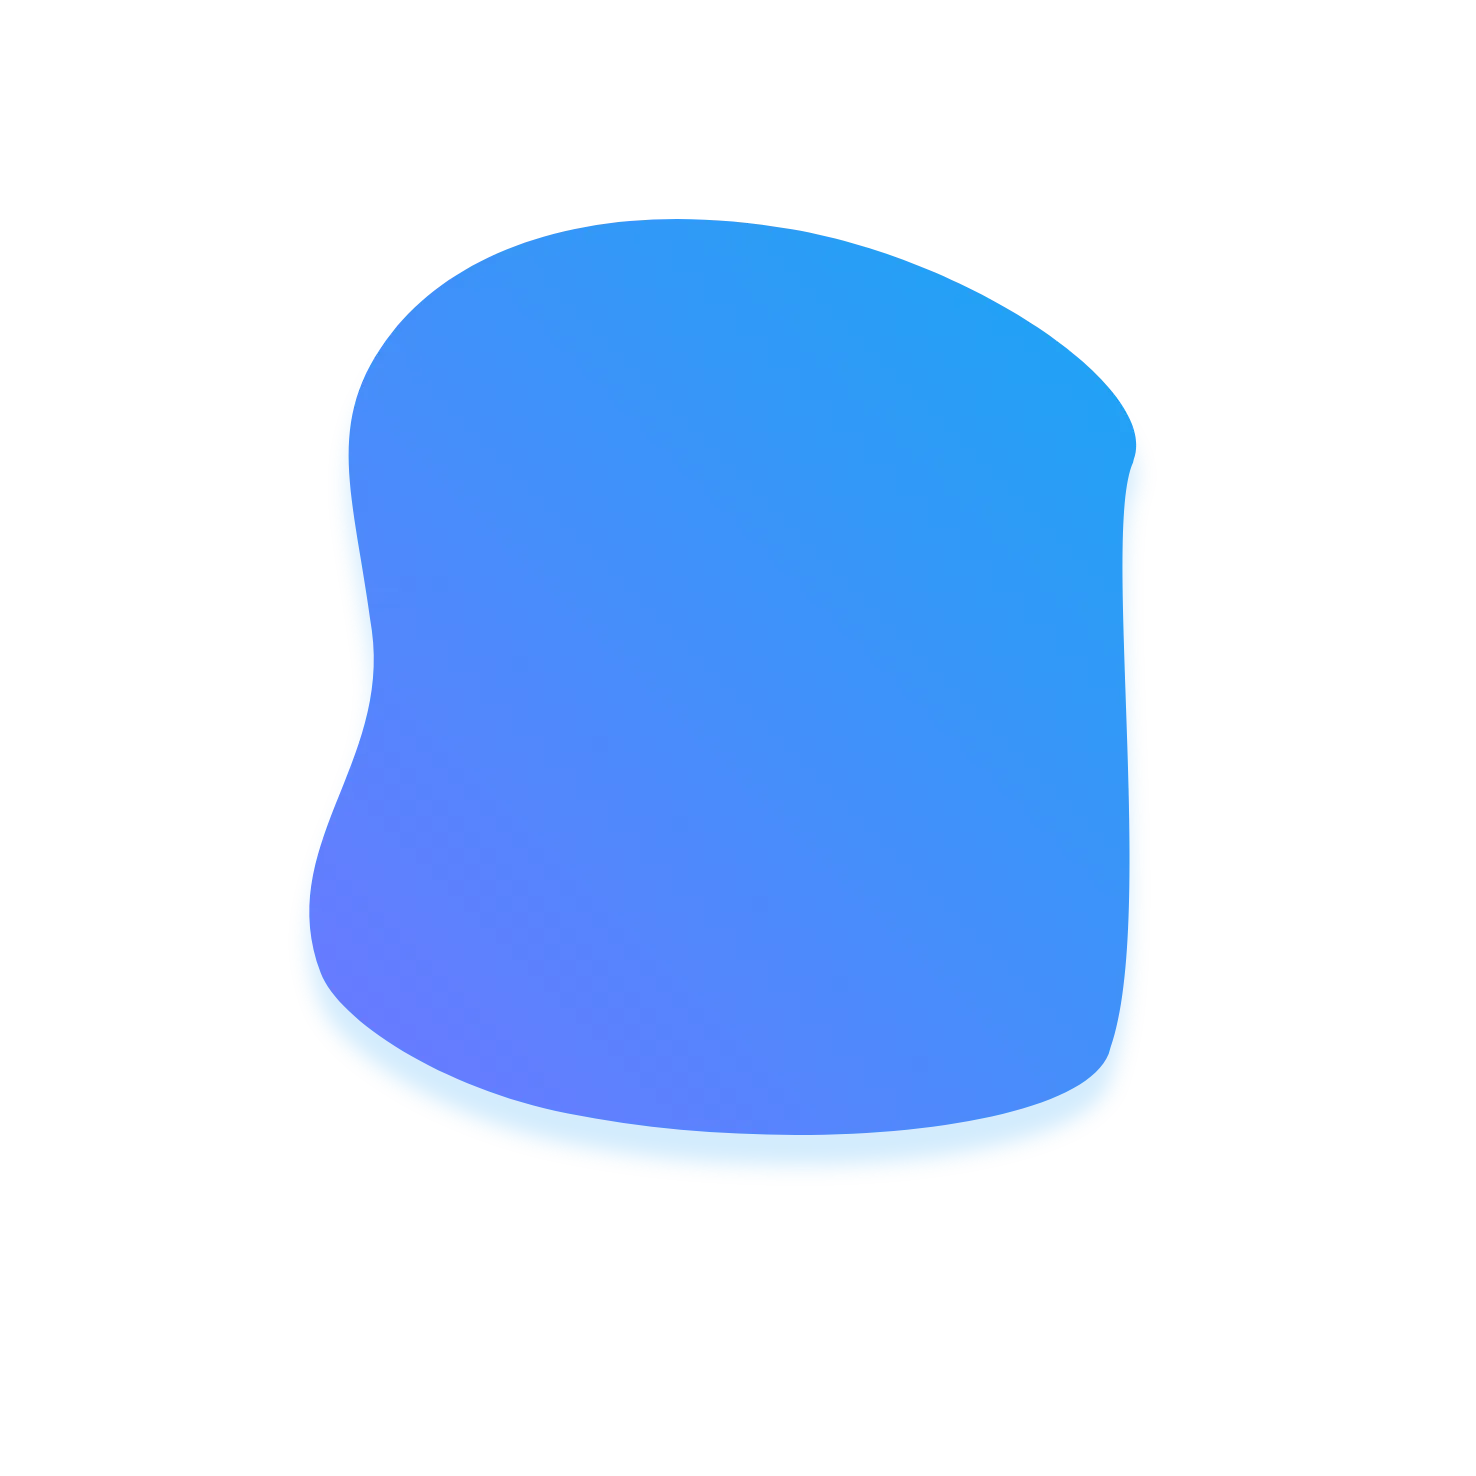 Blob Background for the Get Signal section